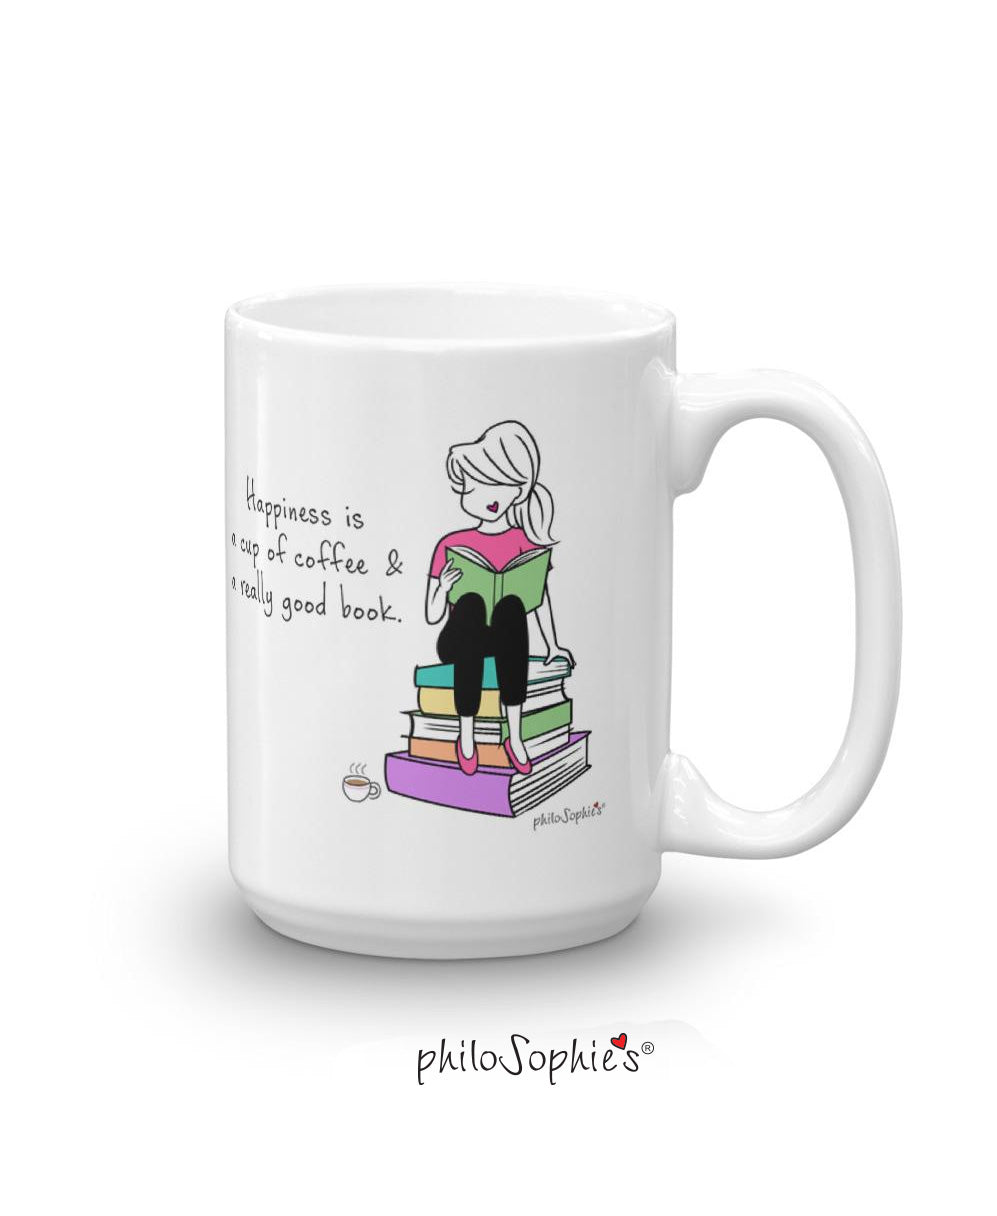 'Happiness is a cup of coffee and a really good book' 15 ounce CeramicMug - philoSophie's®